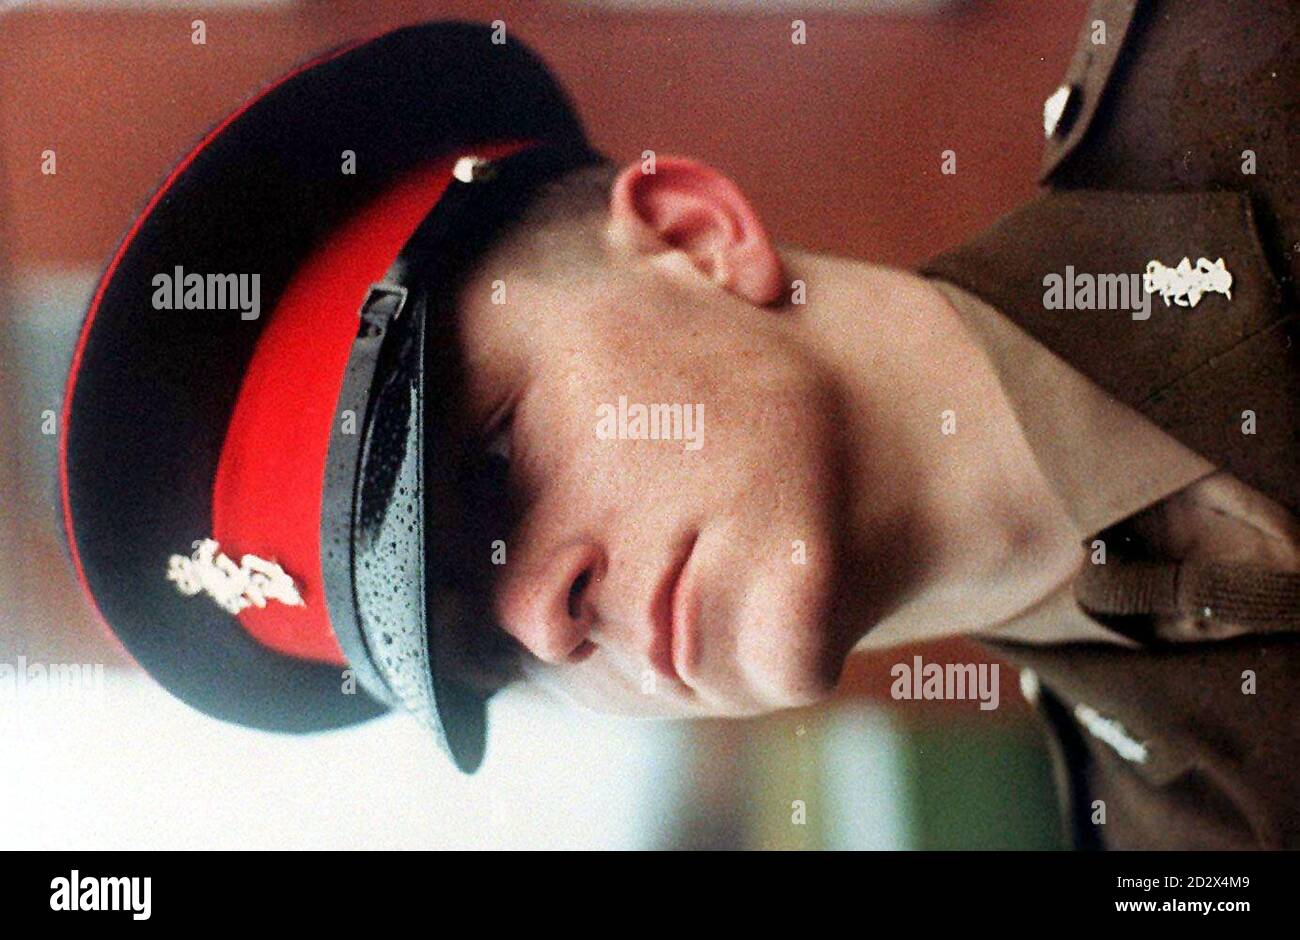 Gulf War veteran Pte John Callaghan, 28, was found dead in his cell in Strangeways Prison, Manchester hanging from a noose made from shoe laces. 20/1/99, An inquest in Manchester heard he suffered from post traumatic stress disorder & Gulf War syndrome.  Stock Photo